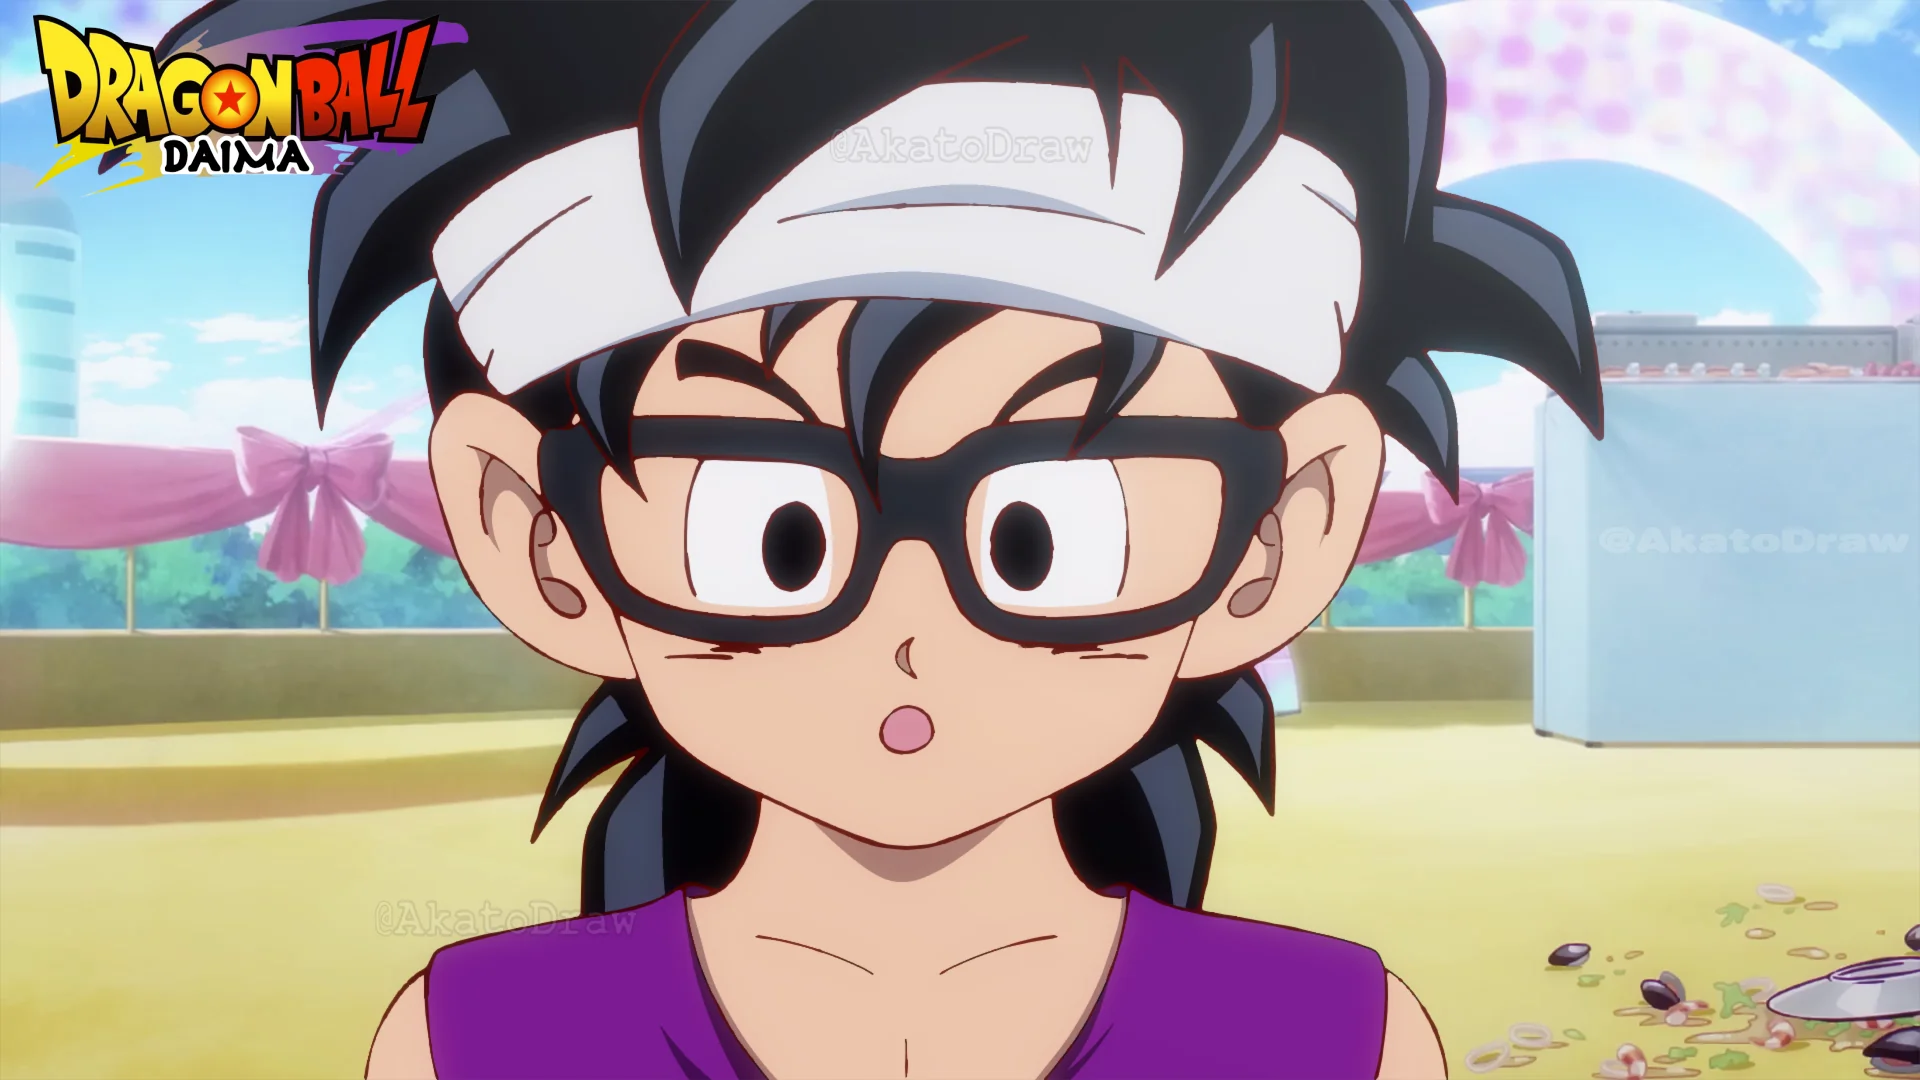 Exciting First Look Dragon Ball Daima Brings Back Kid Goku in a Fresh Adventure for 2024---